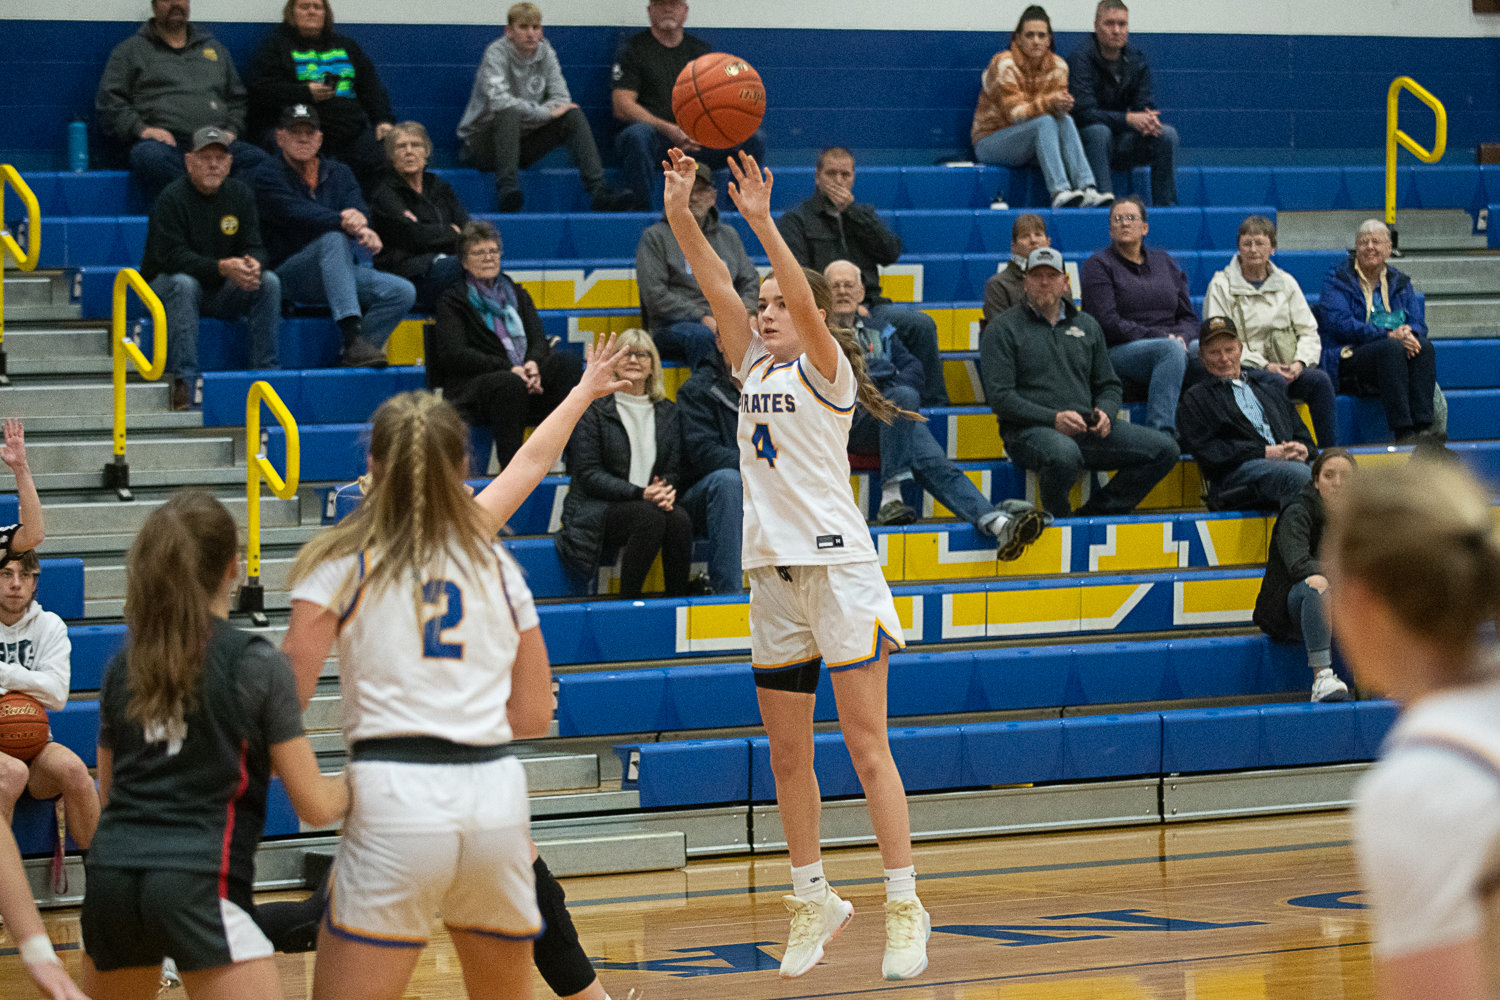 Brooklyn Loose shoots a 3-pointer during the first half of Adna's 72-28 win over Wahkiakum on Jan. 13.